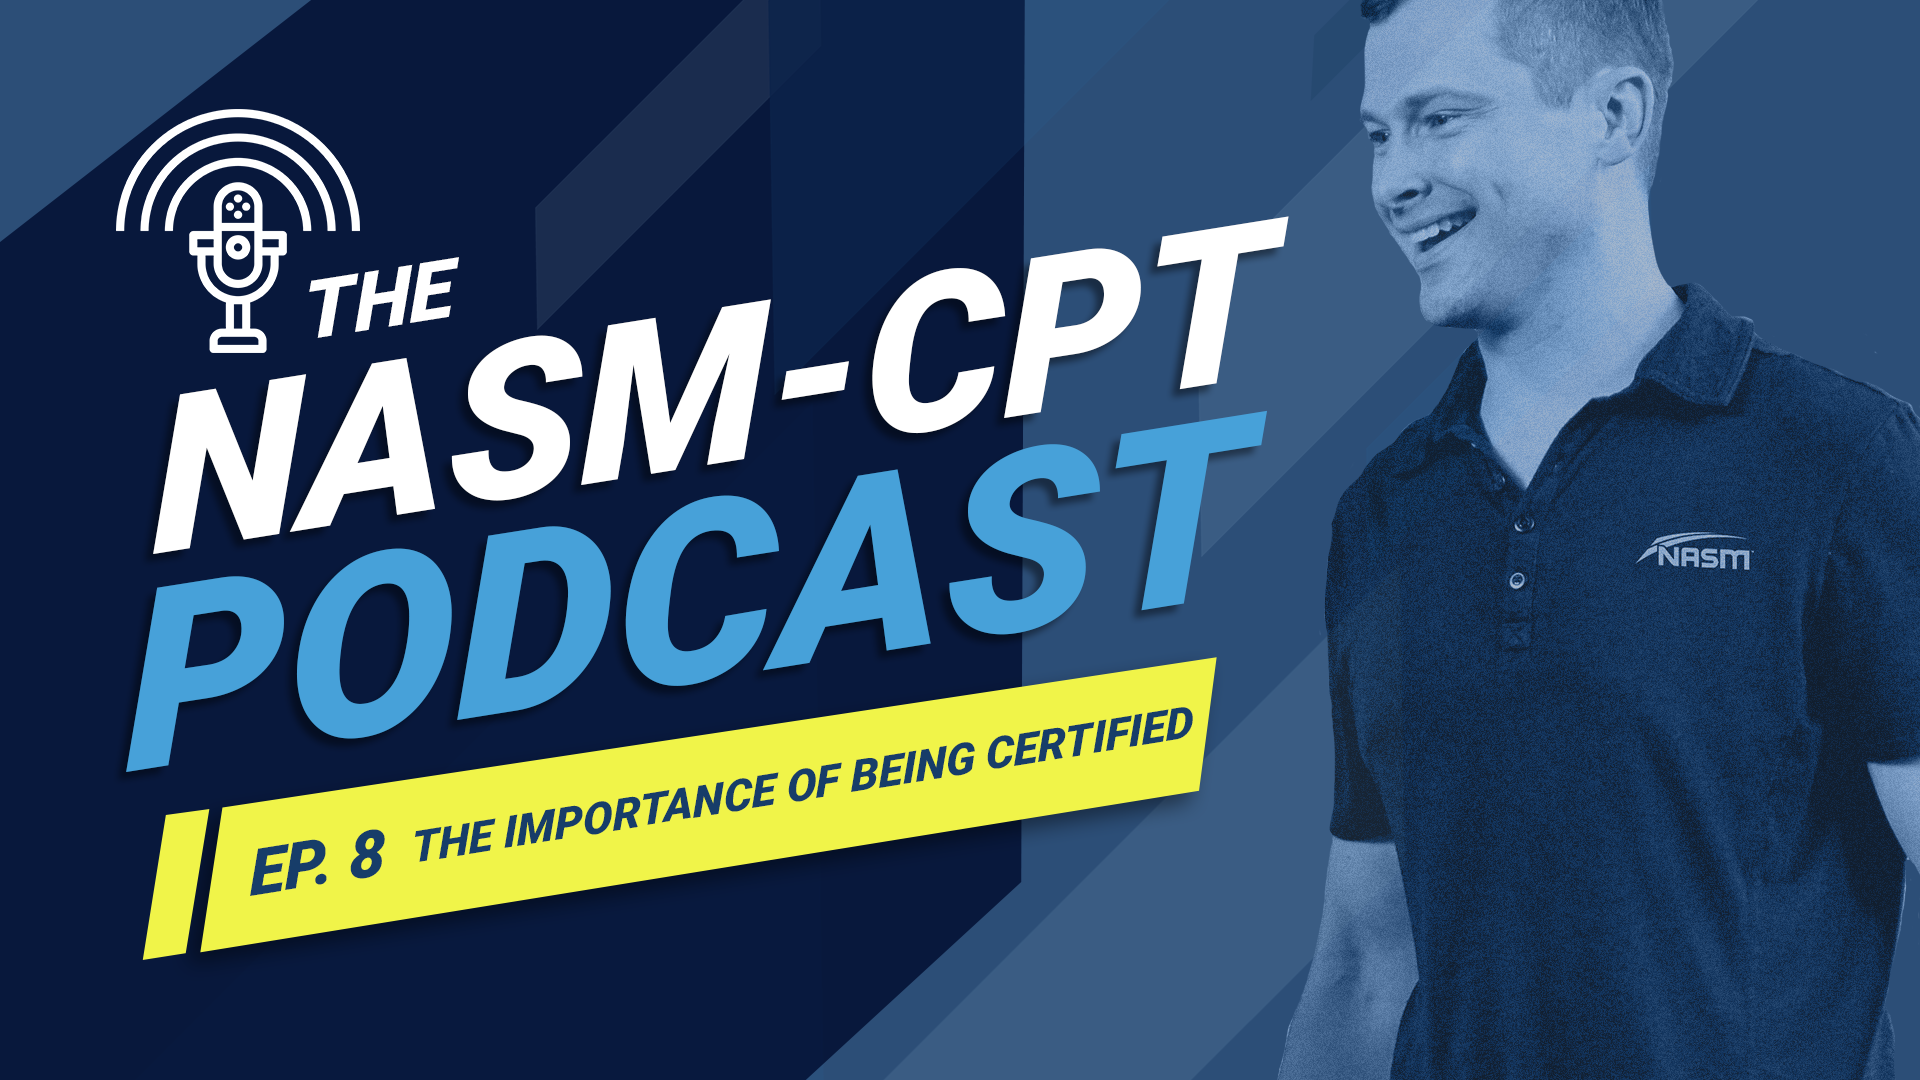 The NASM-CPT Podcast Ep. 8 The Importance of Being Certified